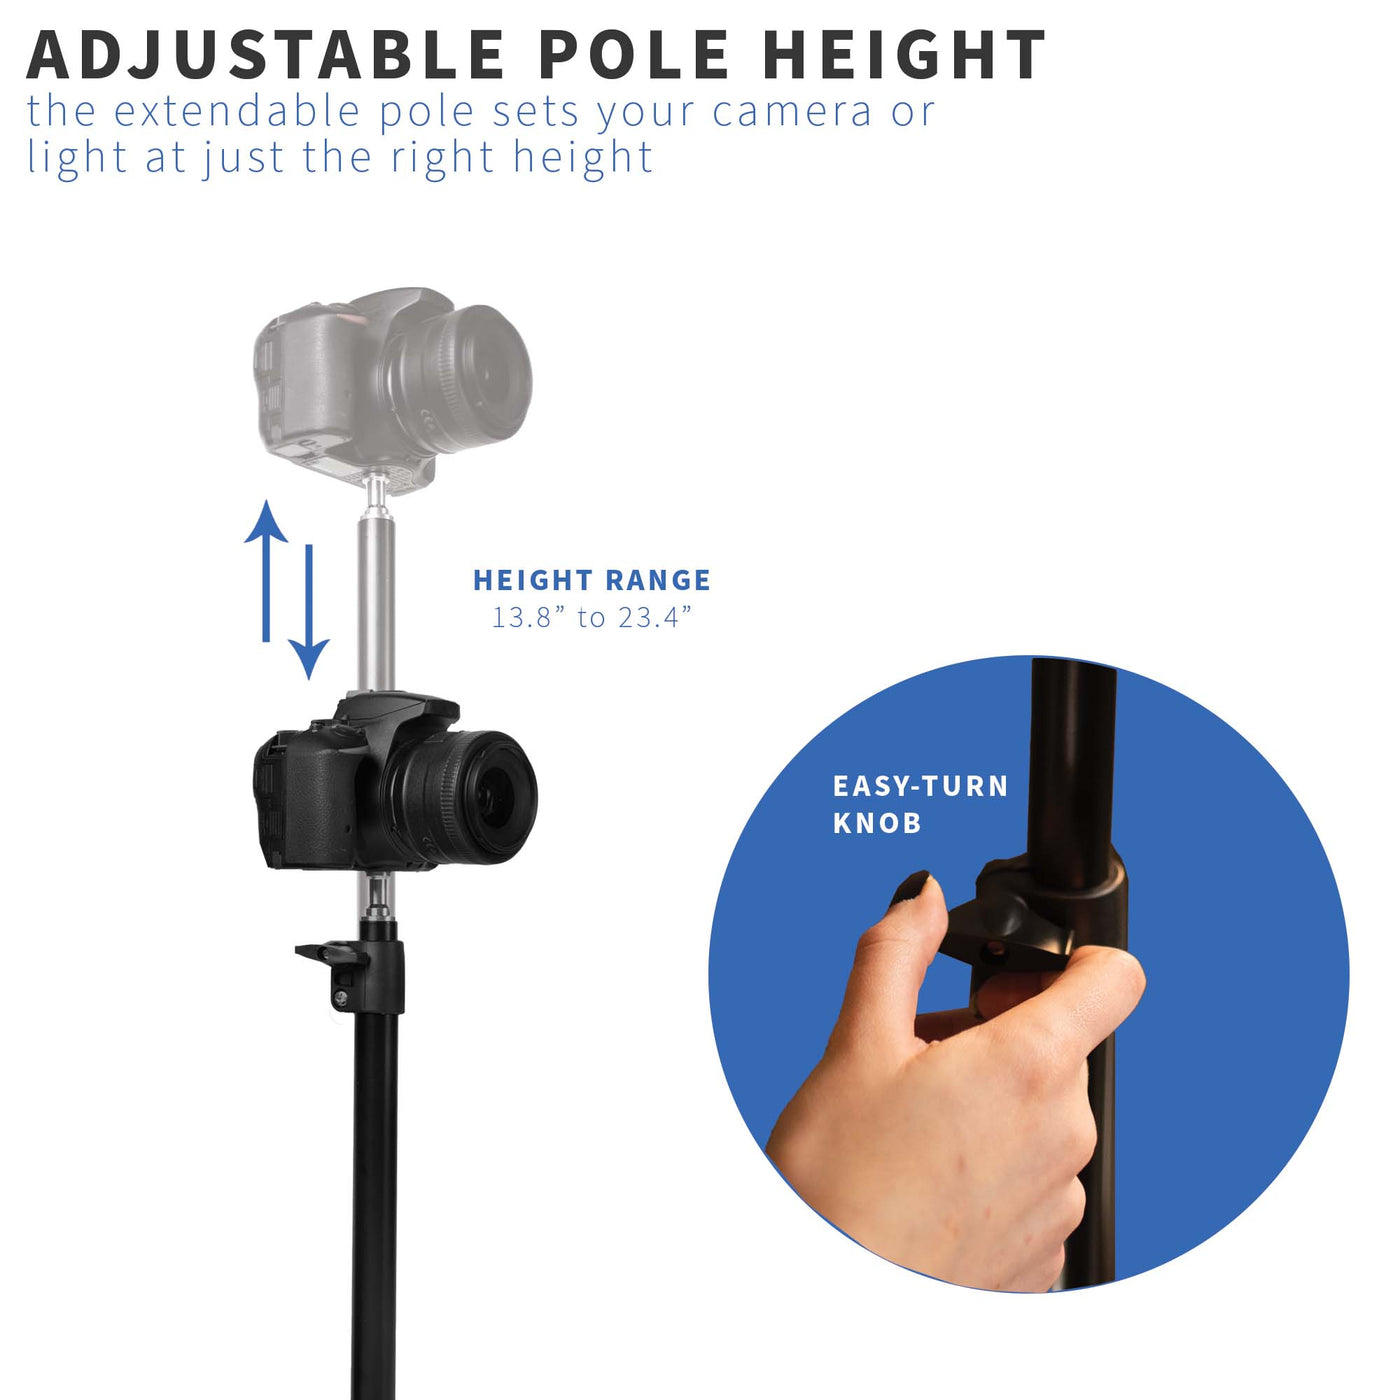 With an easy turn, the height adjustment knob swiftly changes the pole height.